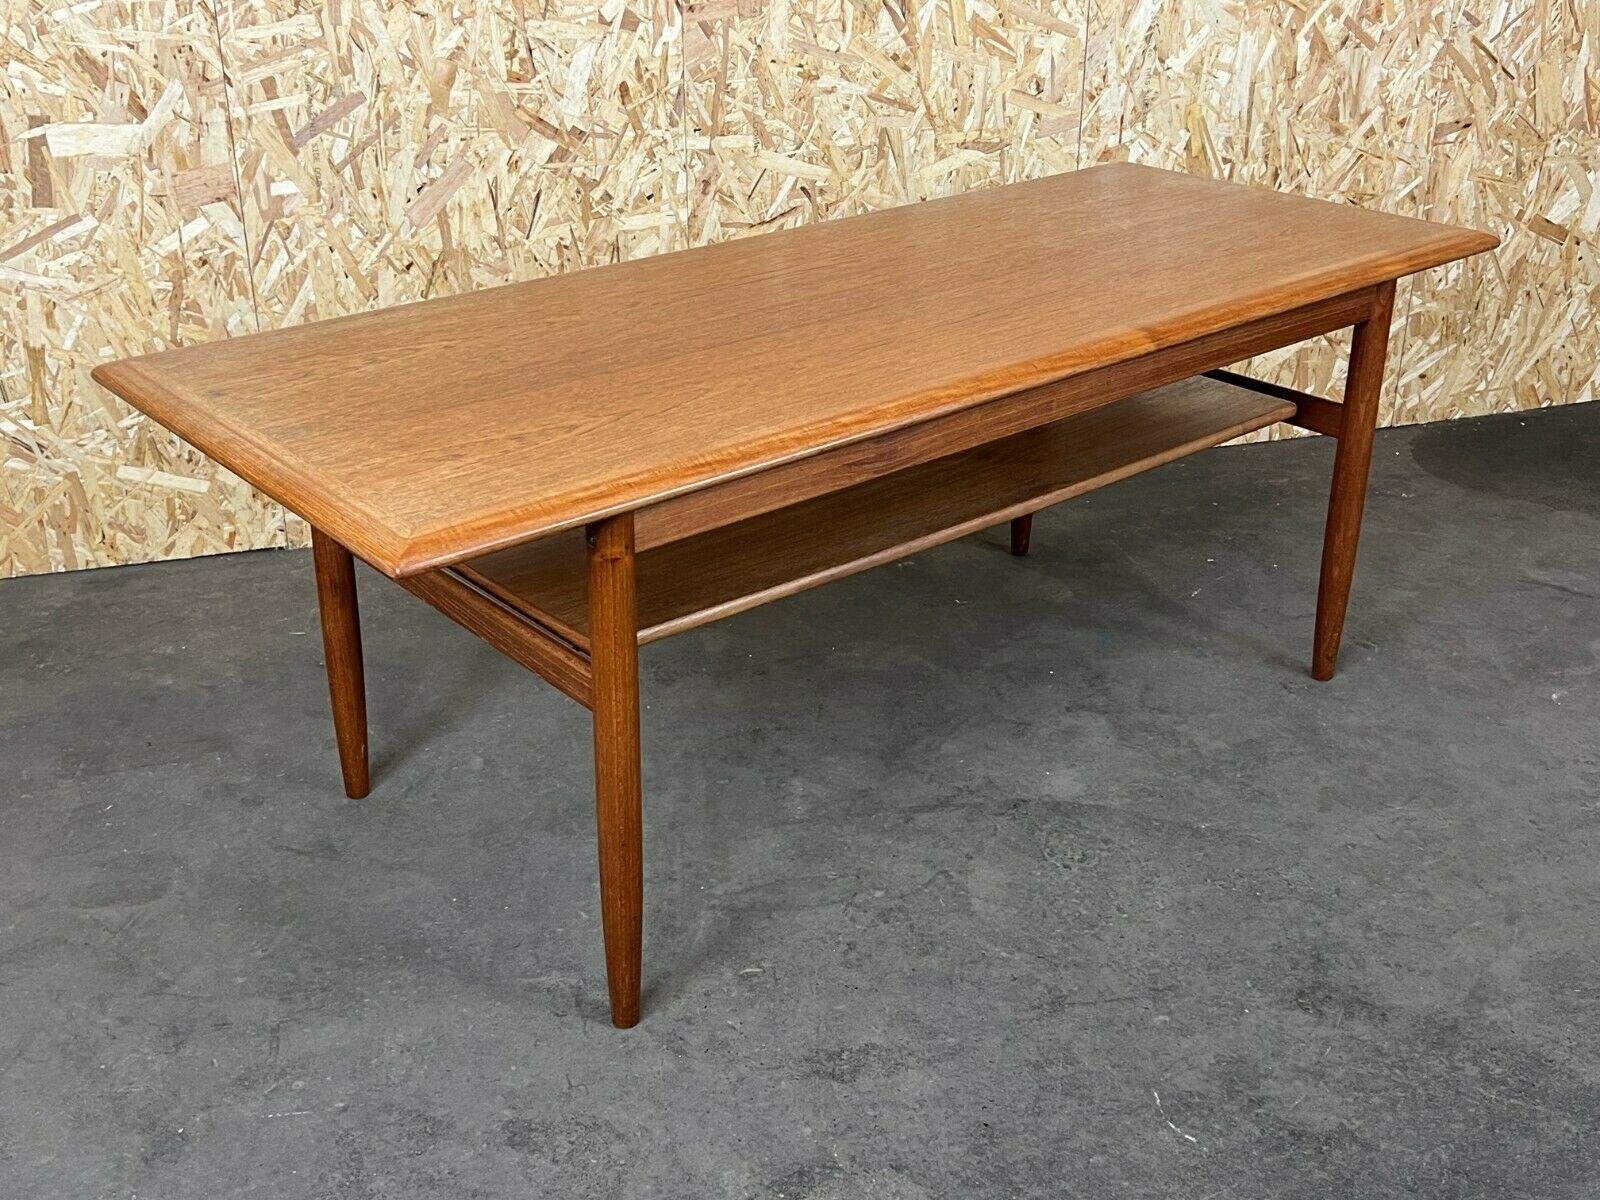 60s 70steak table coffee table danish modern design Denmark

Object: coffee table

Manufacturer:

Condition: good

Age: around 1960-1970

Dimensions:

149.5cm x 60cm x 54.5cm

Other notes:

The pictures serve as part of the